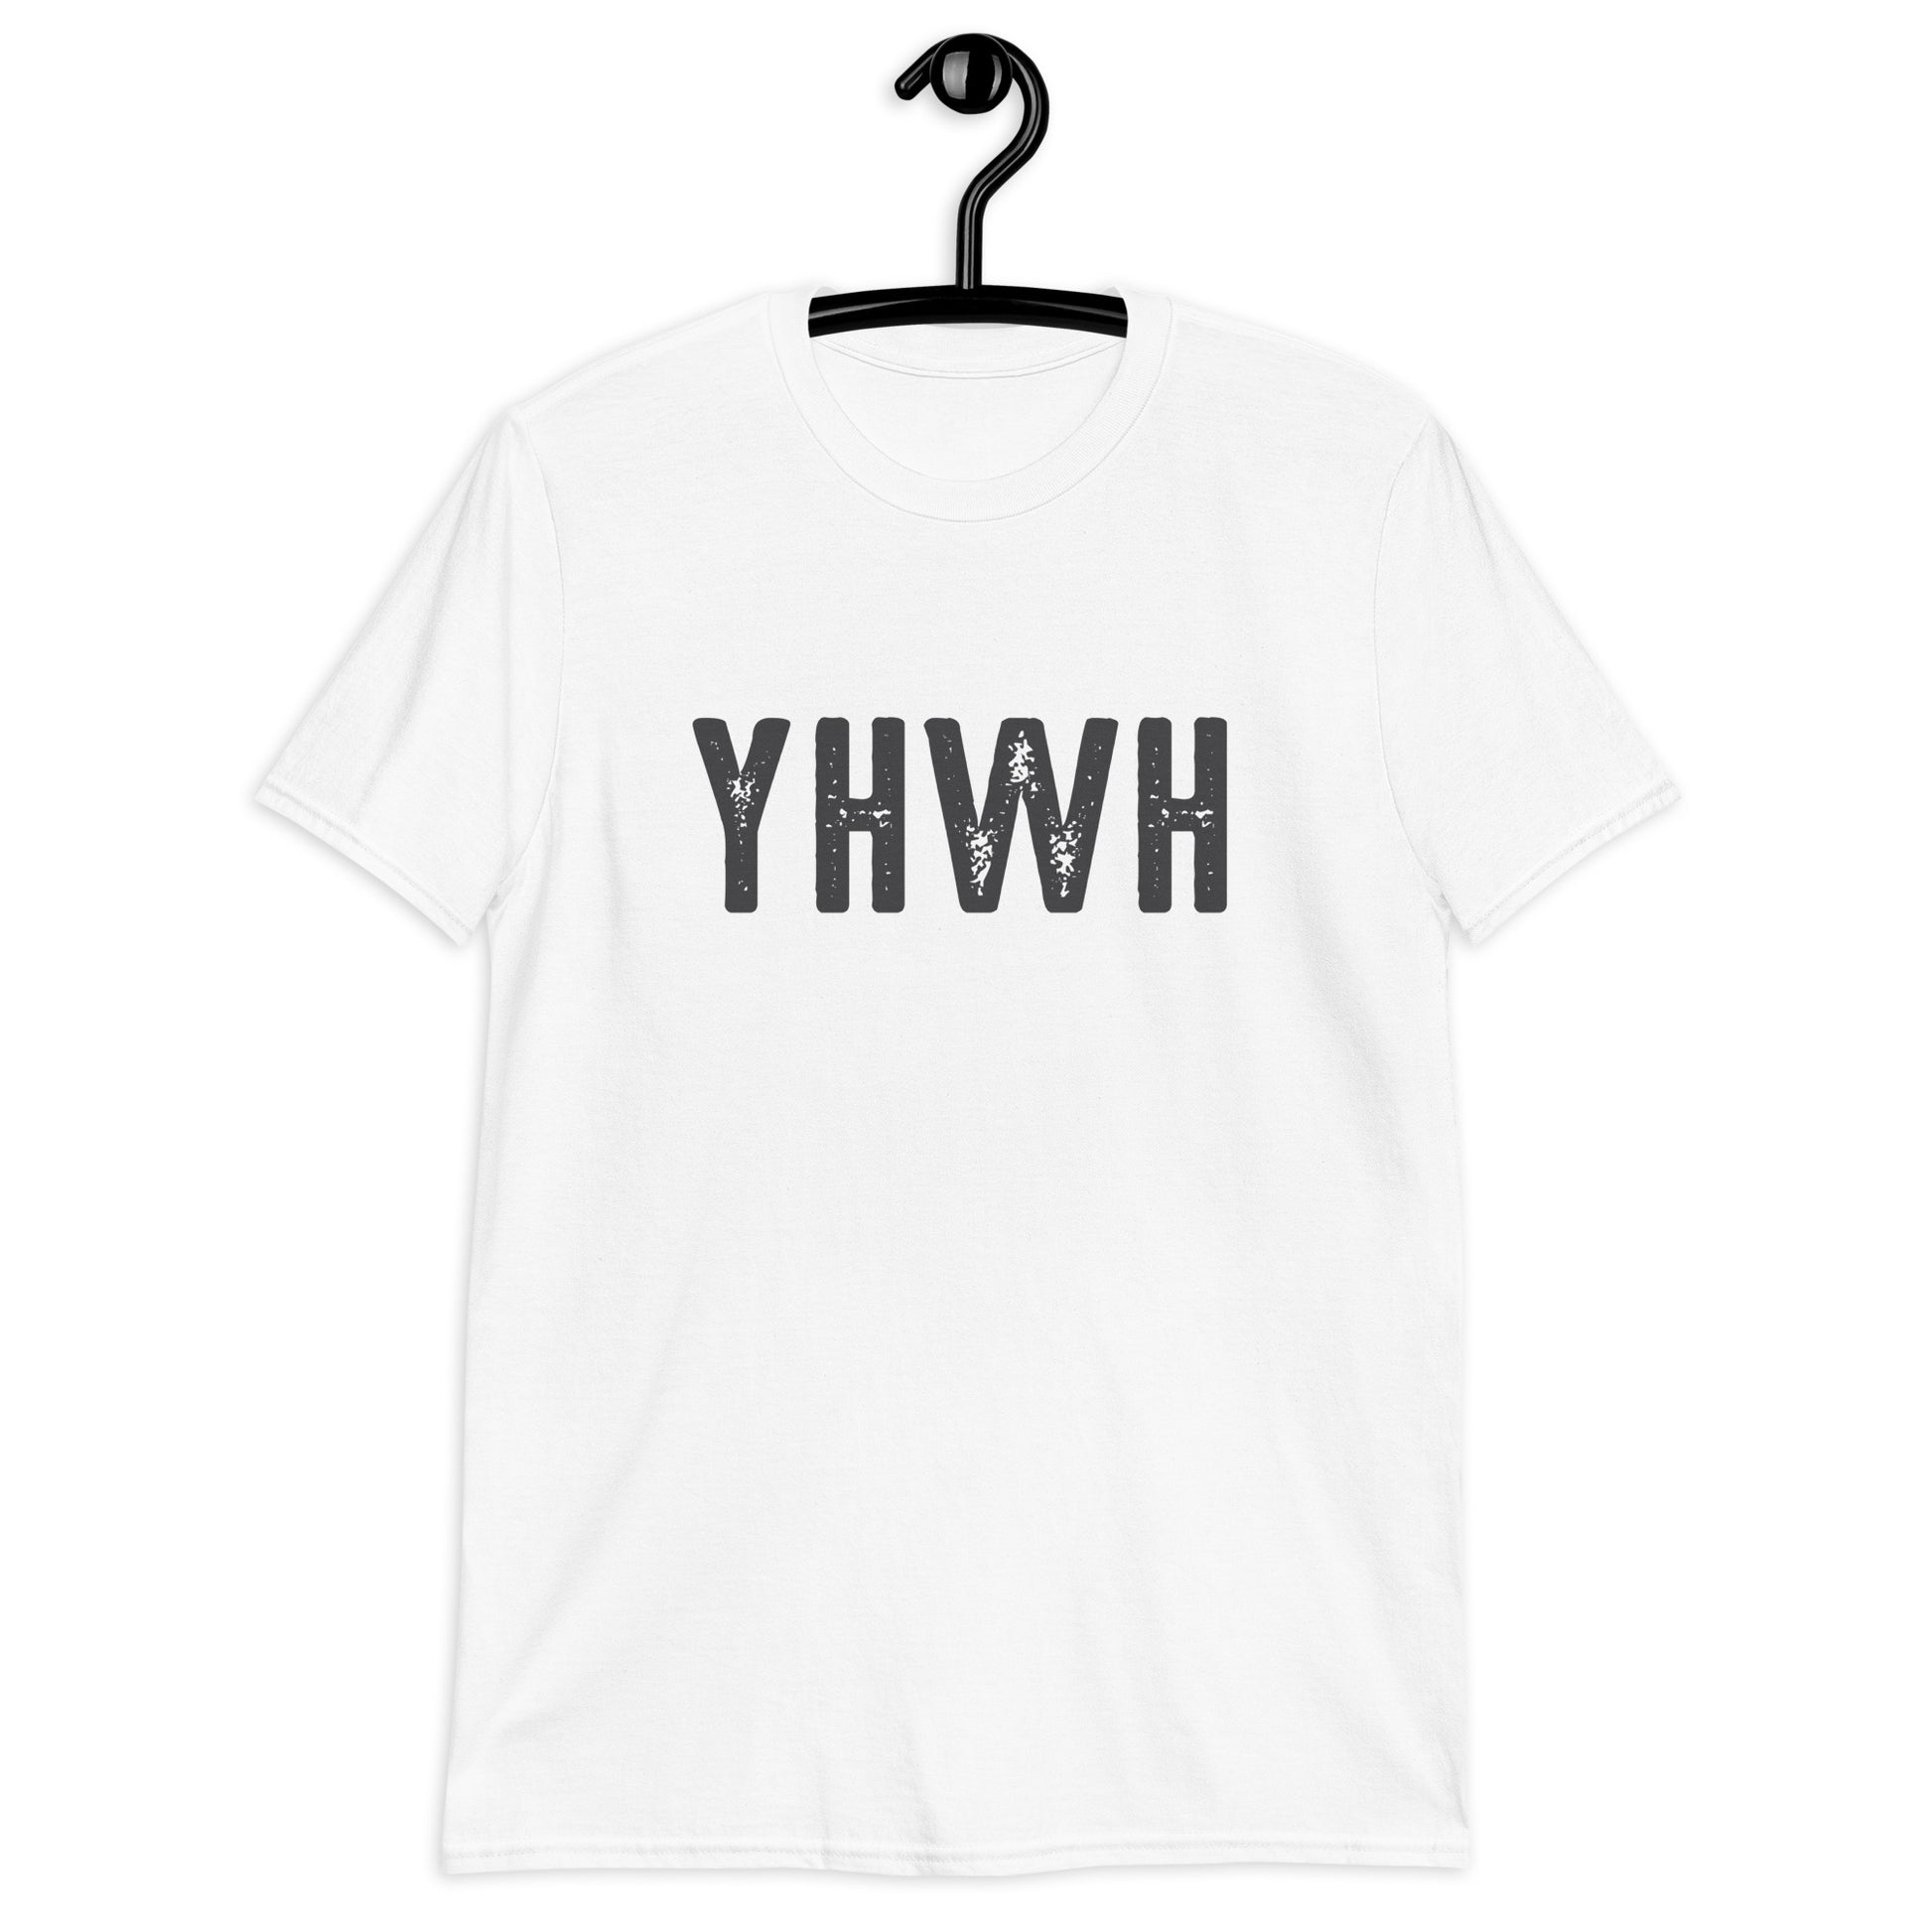 YHWH Hebrew Biblical Name of God Yahweh Christian aesthetic distressed design printed in charcoal on soft white unisex t-shirt for men and women